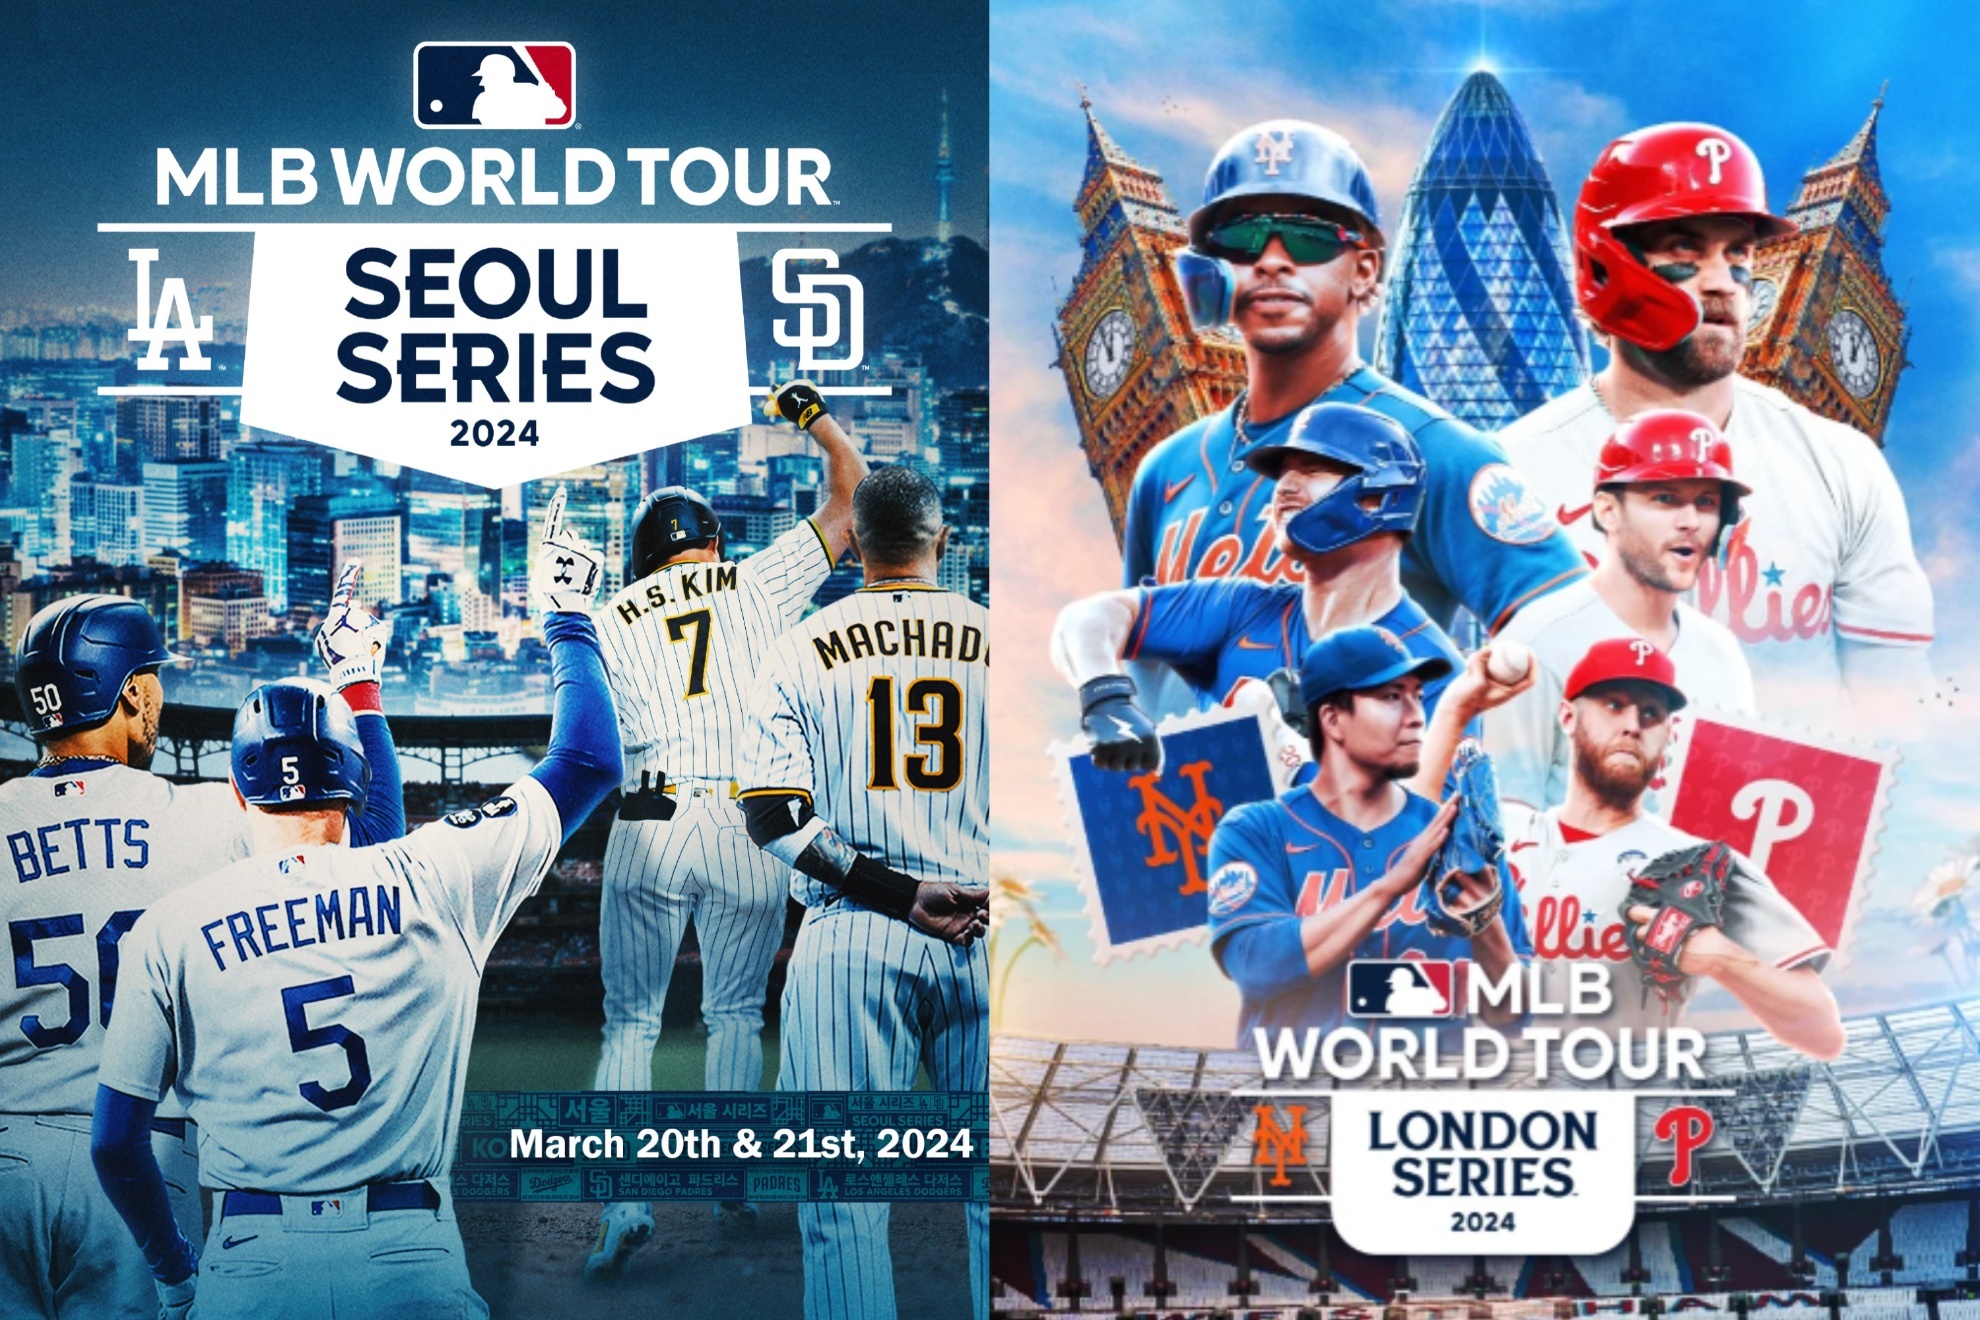 MLB announced the cities that will hosts its 2024 World Tour